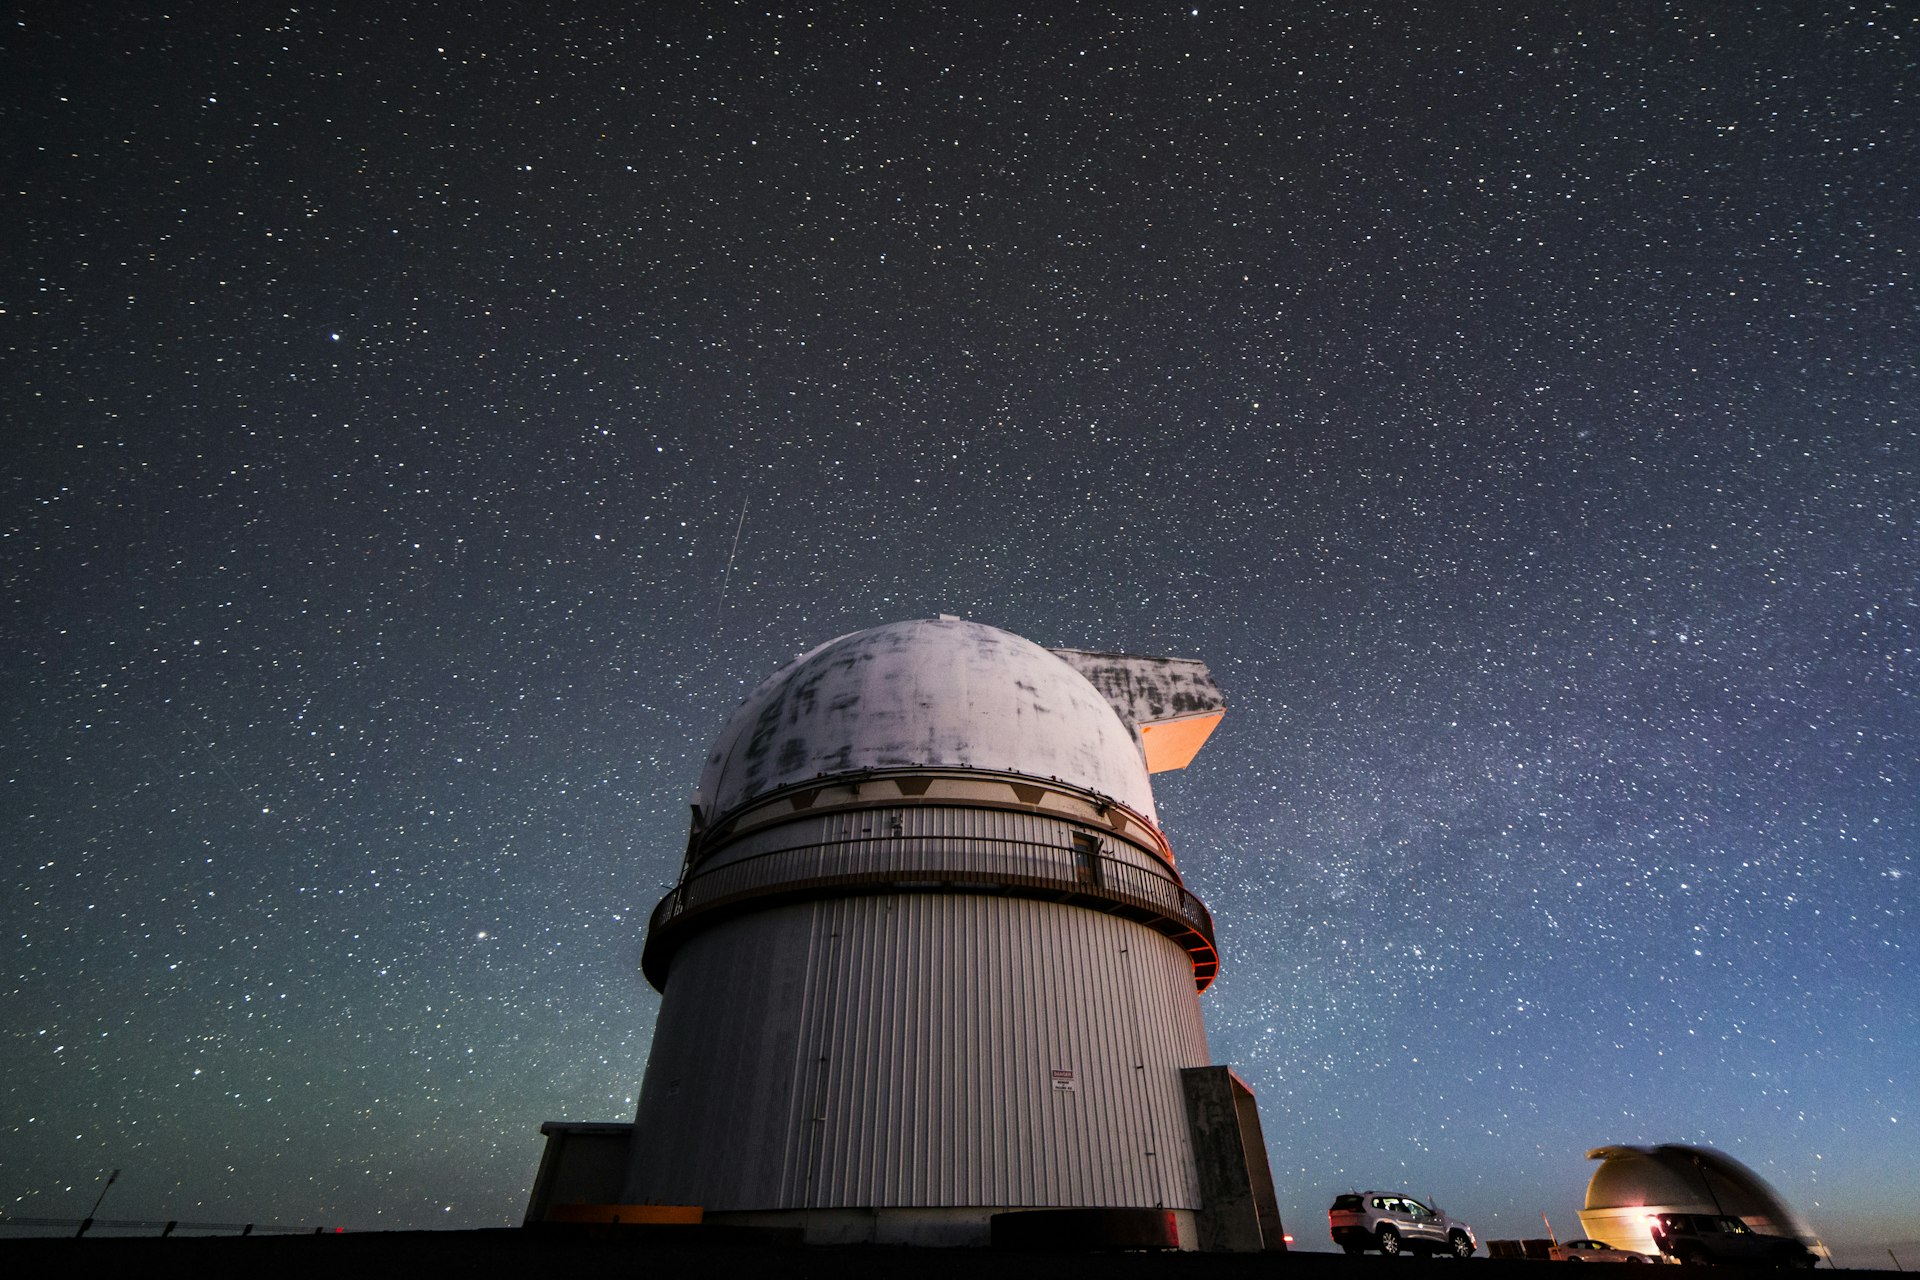 Observation telescope with a starry night sky in the background at Maunakea, Hawaii